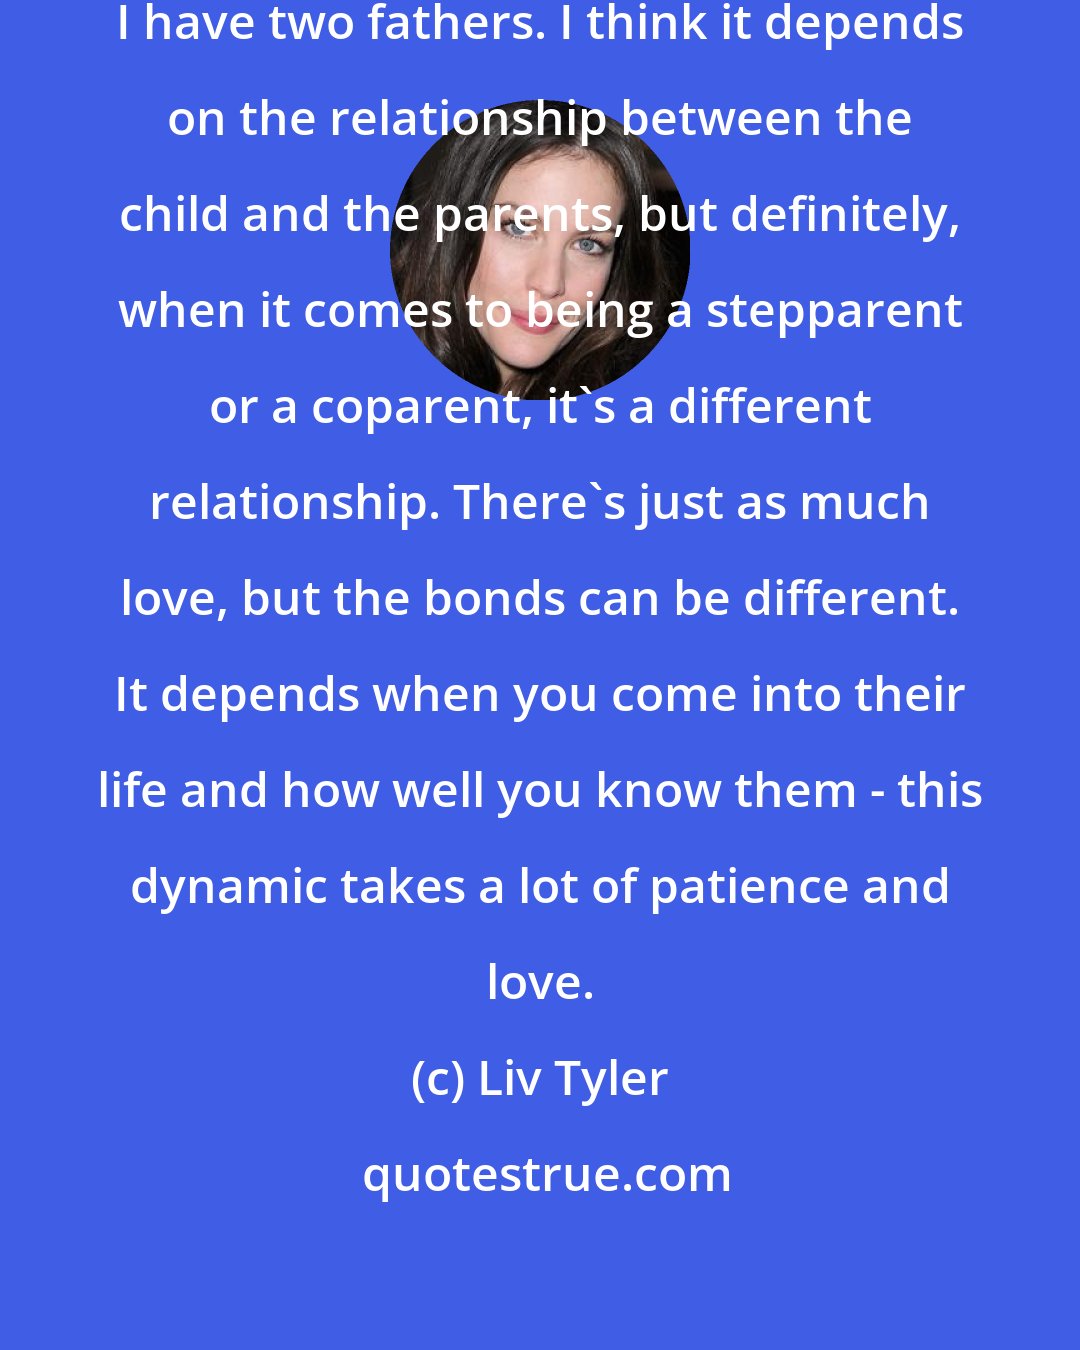 Liv Tyler: My family dynamic is quite eccentric. I have two fathers. I think it depends on the relationship between the child and the parents, but definitely, when it comes to being a stepparent or a coparent, it's a different relationship. There's just as much love, but the bonds can be different. It depends when you come into their life and how well you know them - this dynamic takes a lot of patience and love.